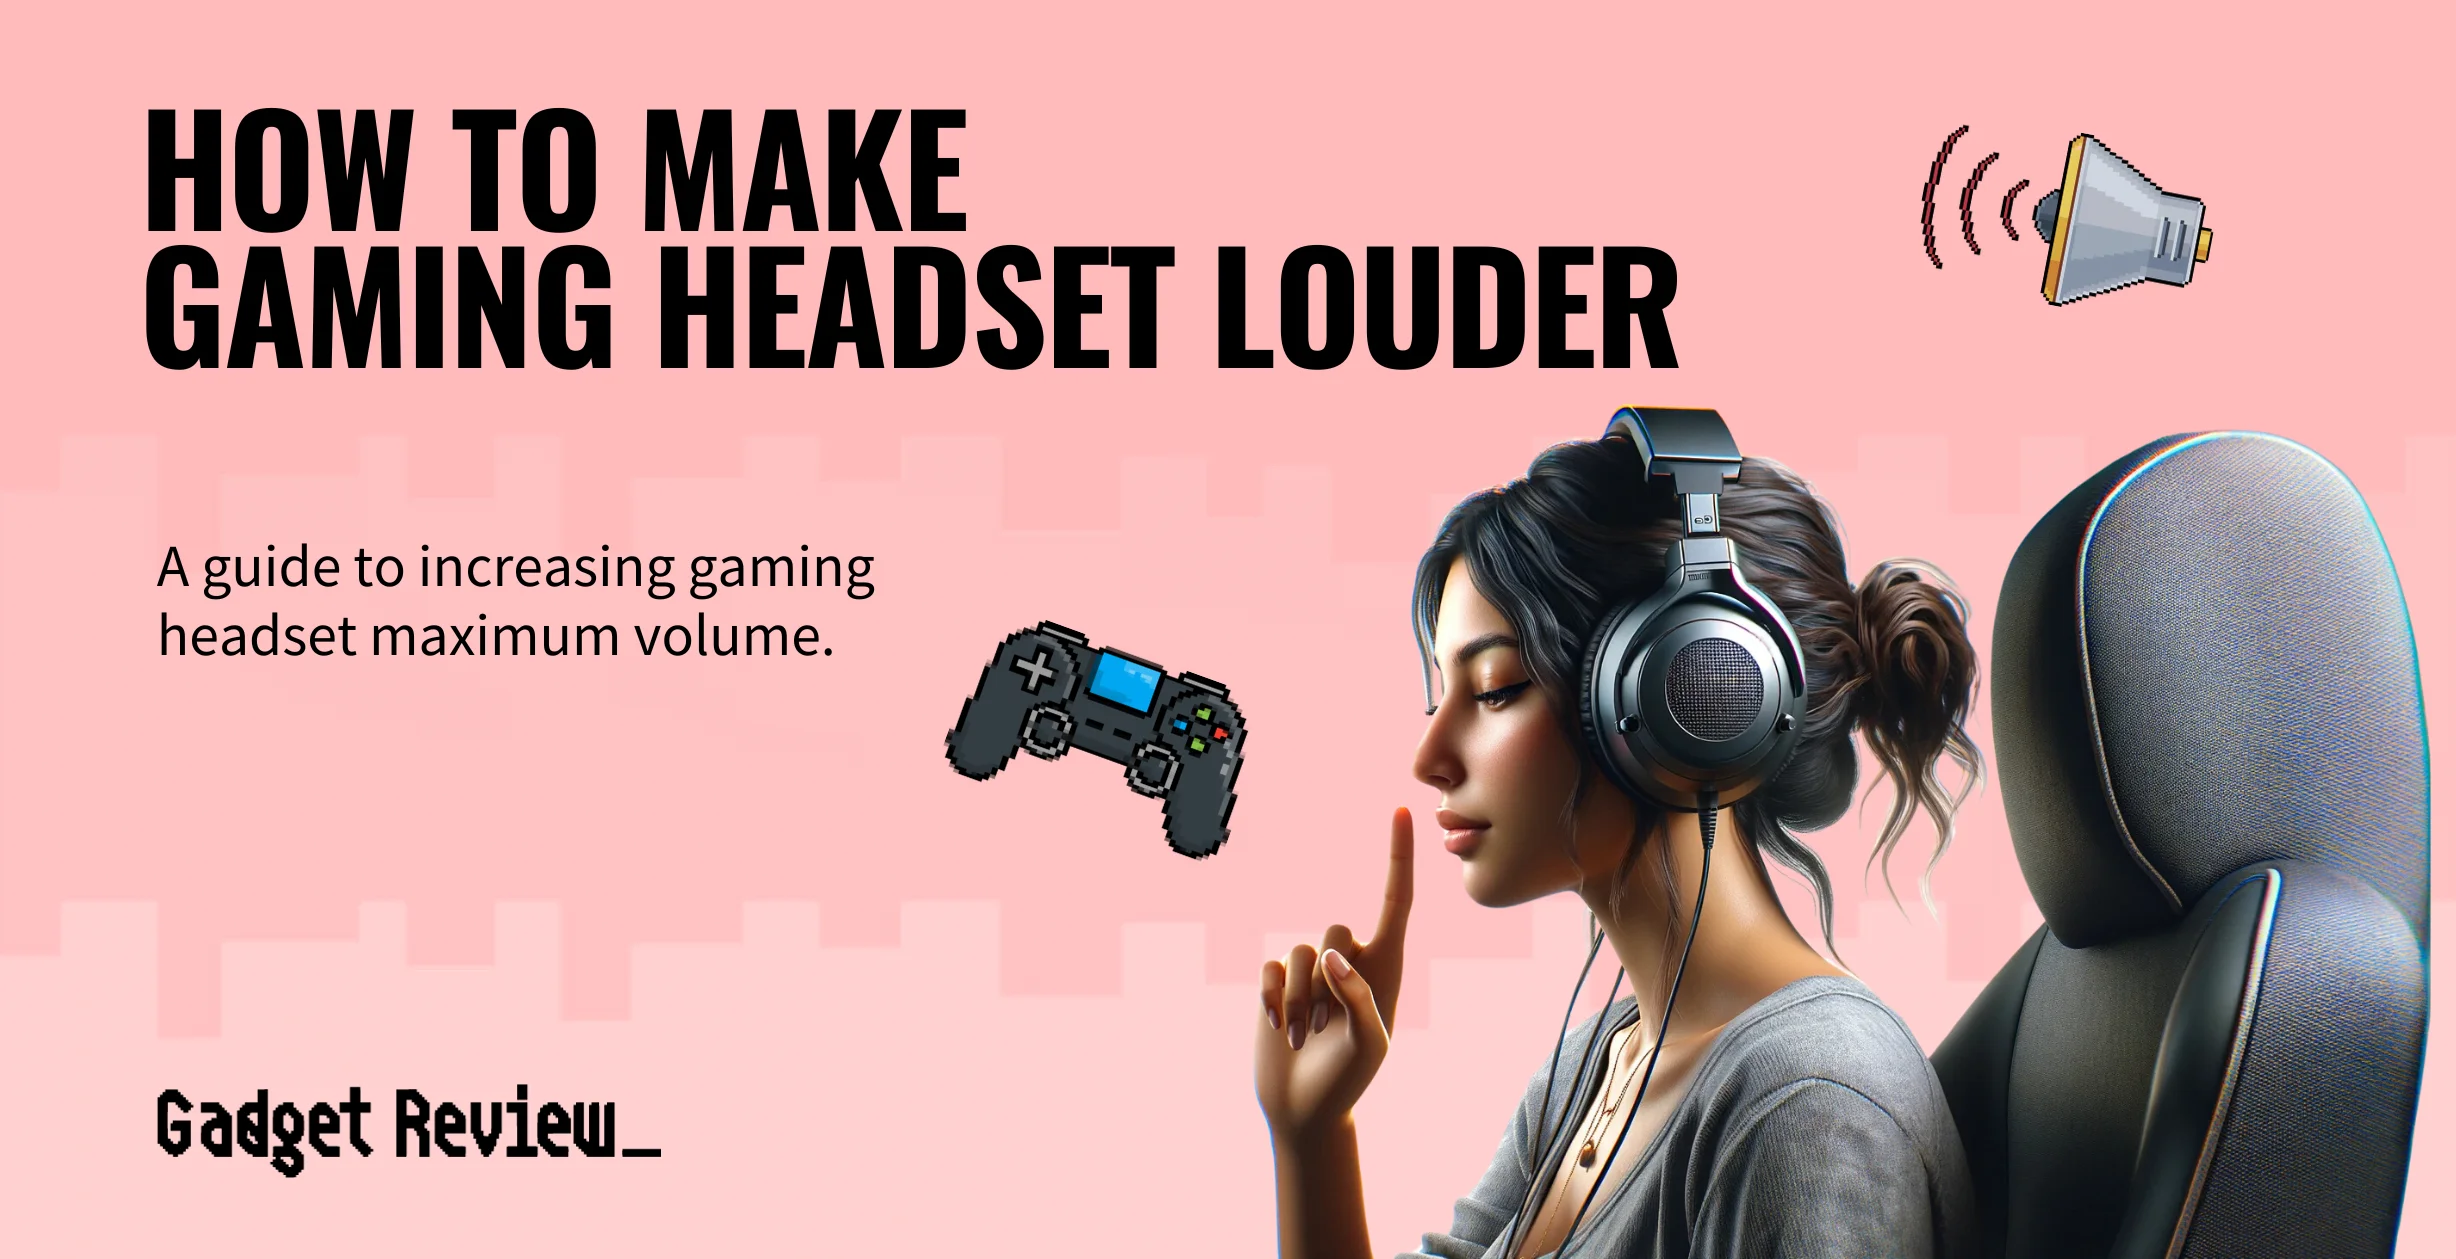 how to make gaming headset louder guide